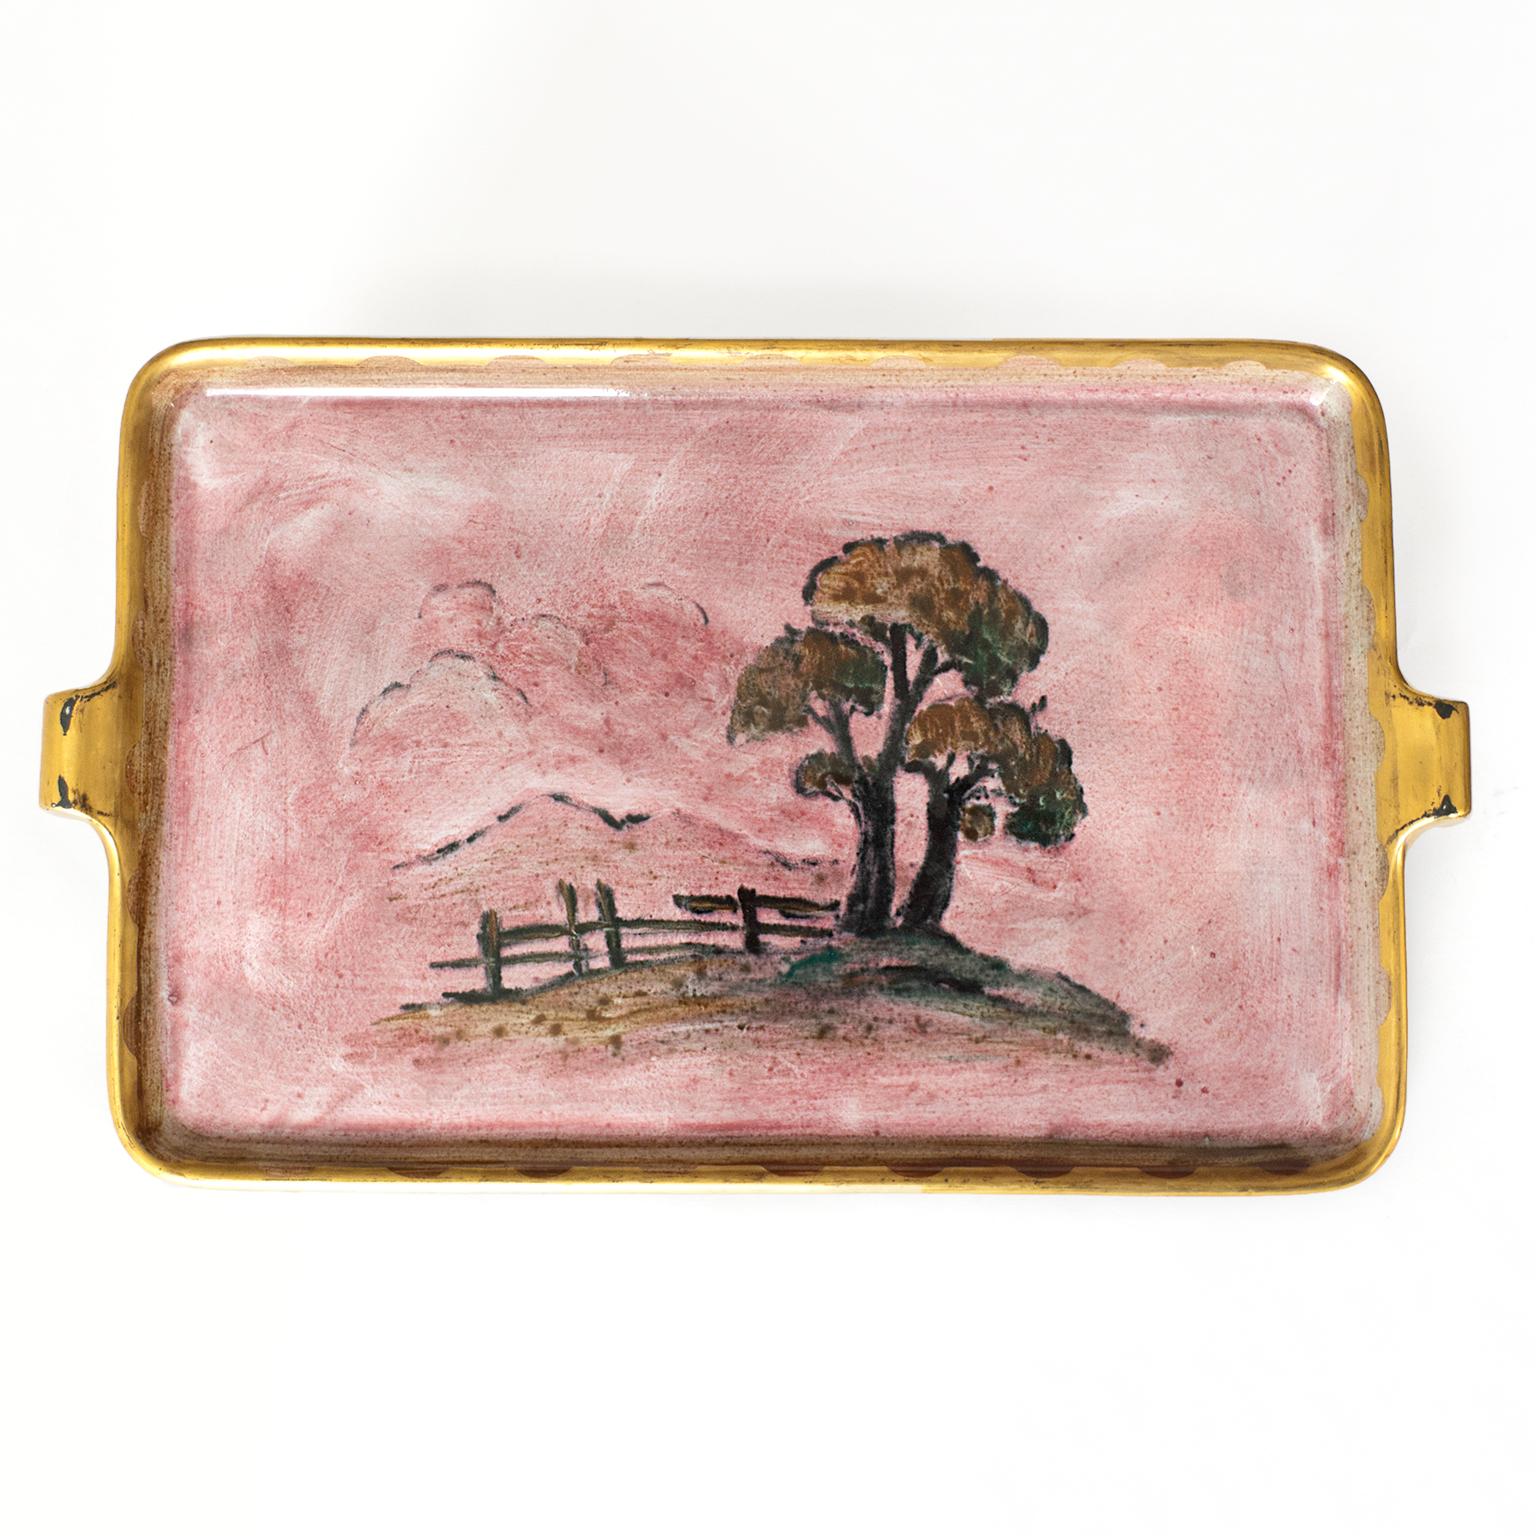 Swedish Art Deco, Scandinavian Modern luster glazed ceramic tray by Josef Ekberg for Gustavsberg features a landscape on a field of pink, detailed in gold. Signed and dated.

Measures: Diameter 18